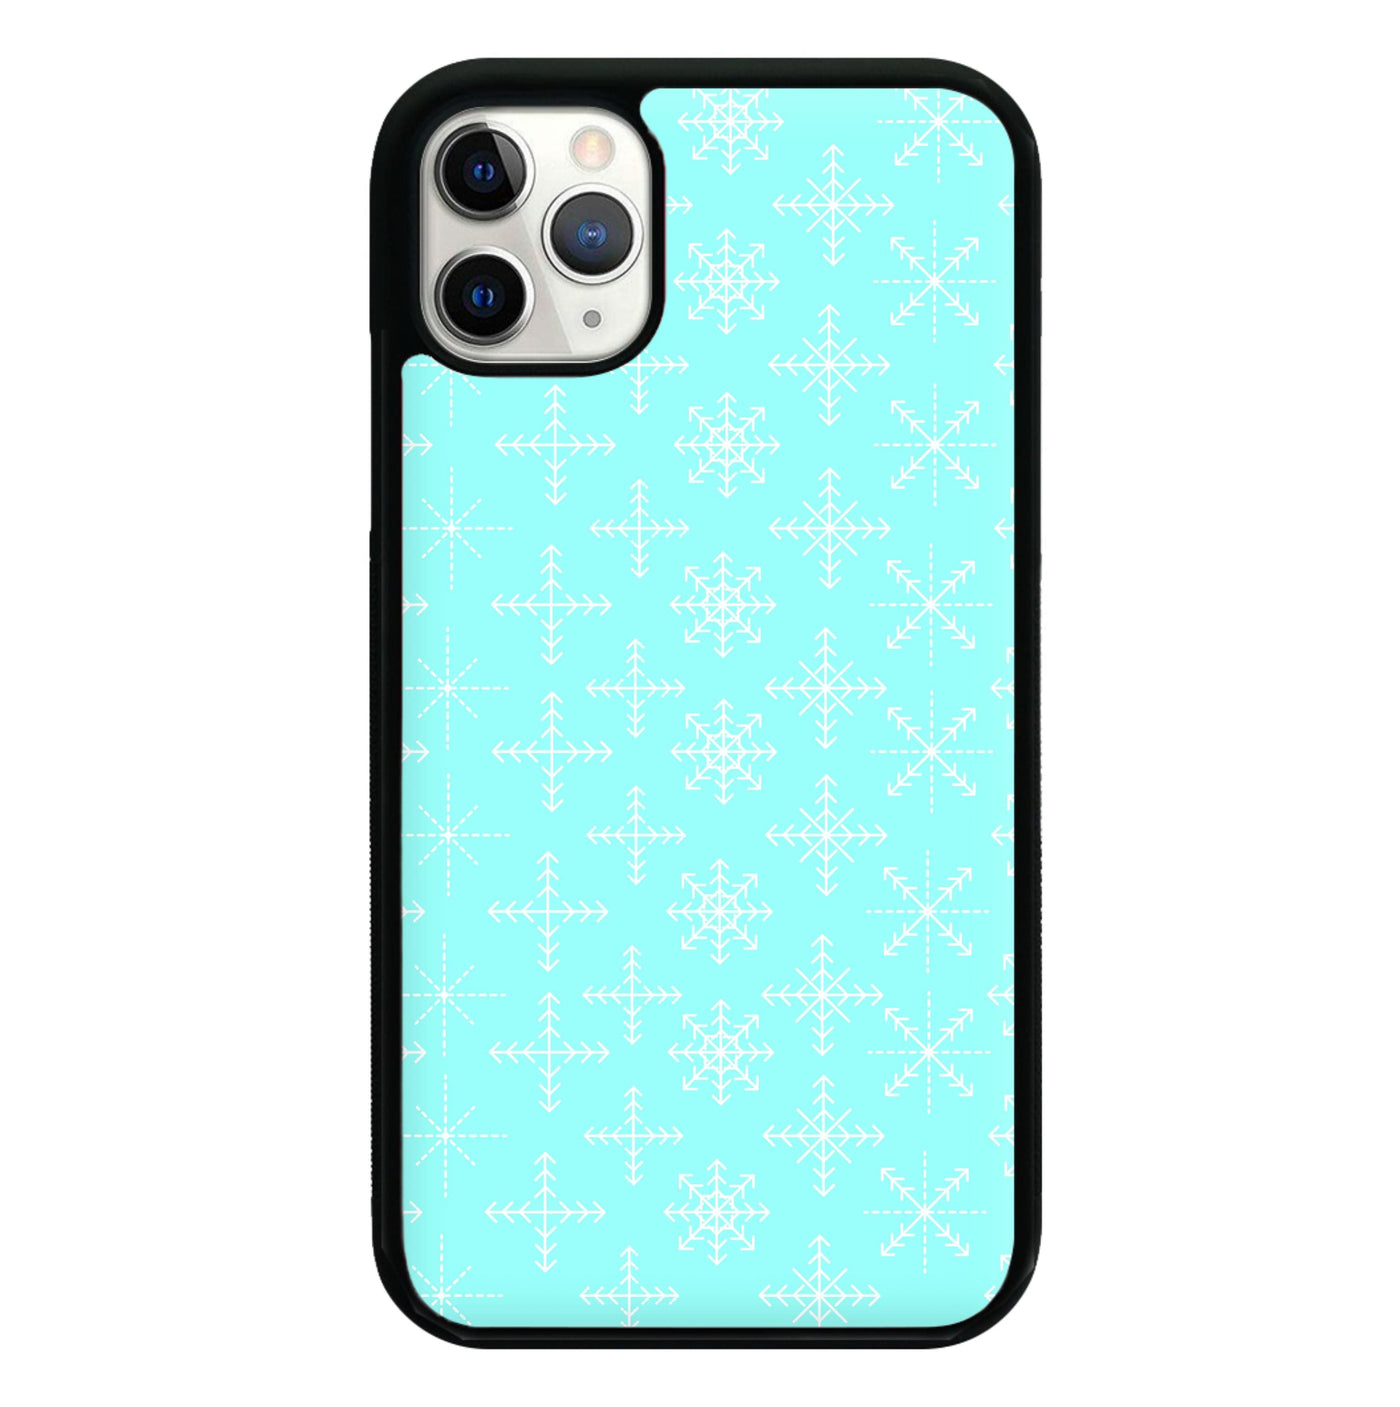 Snowflakes - Christmas Patterns Phone Case